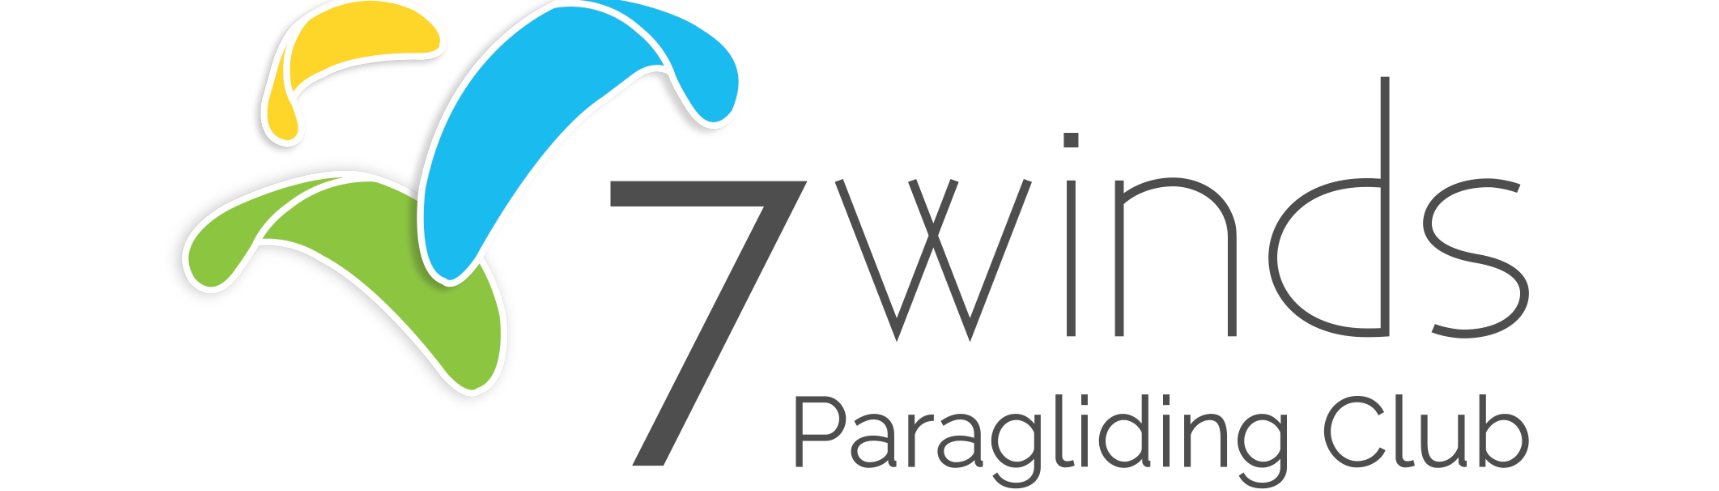 7winds paragliding club